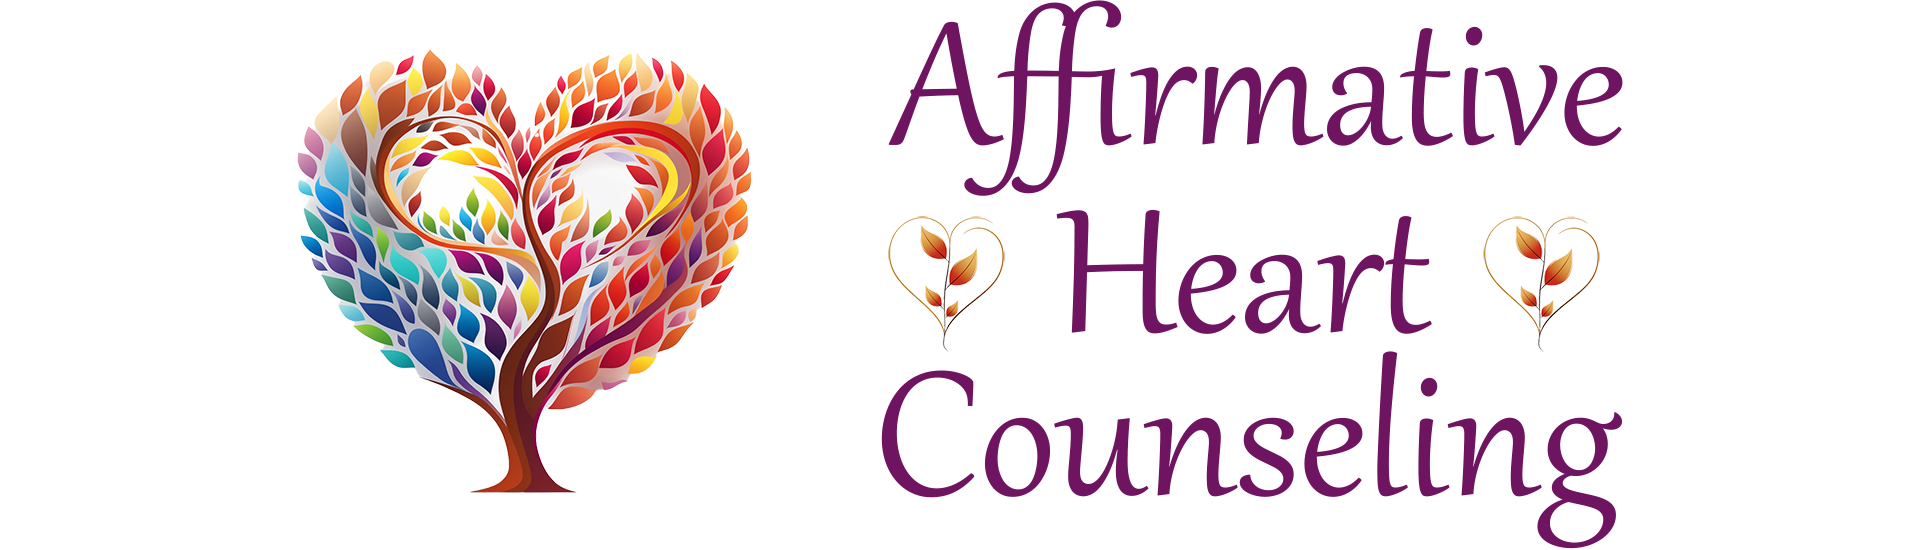 Affirmative Heart Counseling | Therapy that's a work of heart